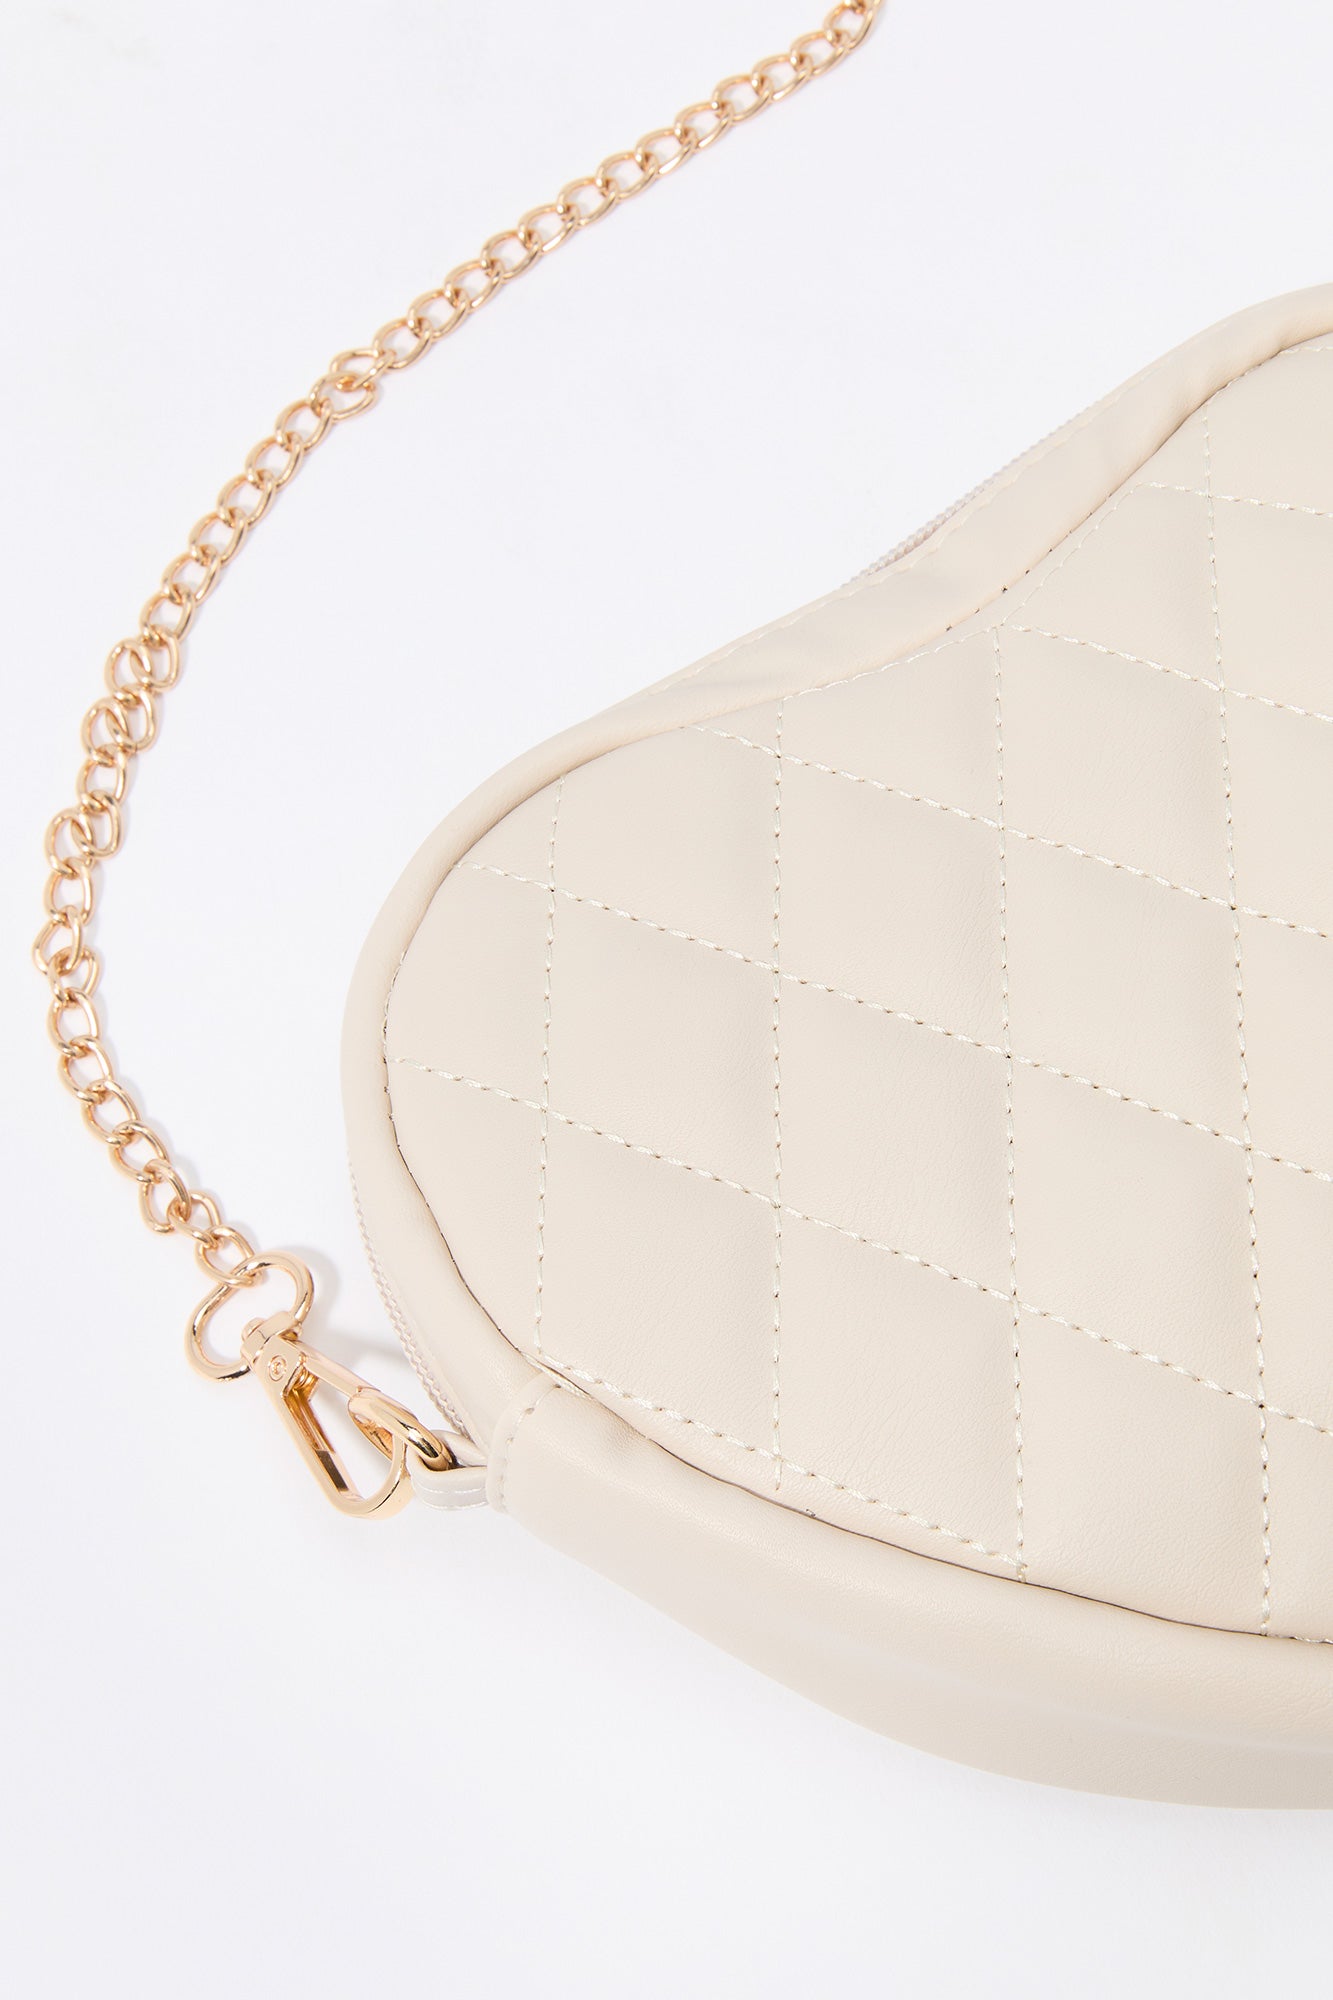 Quilted Heart Crossbody Purse